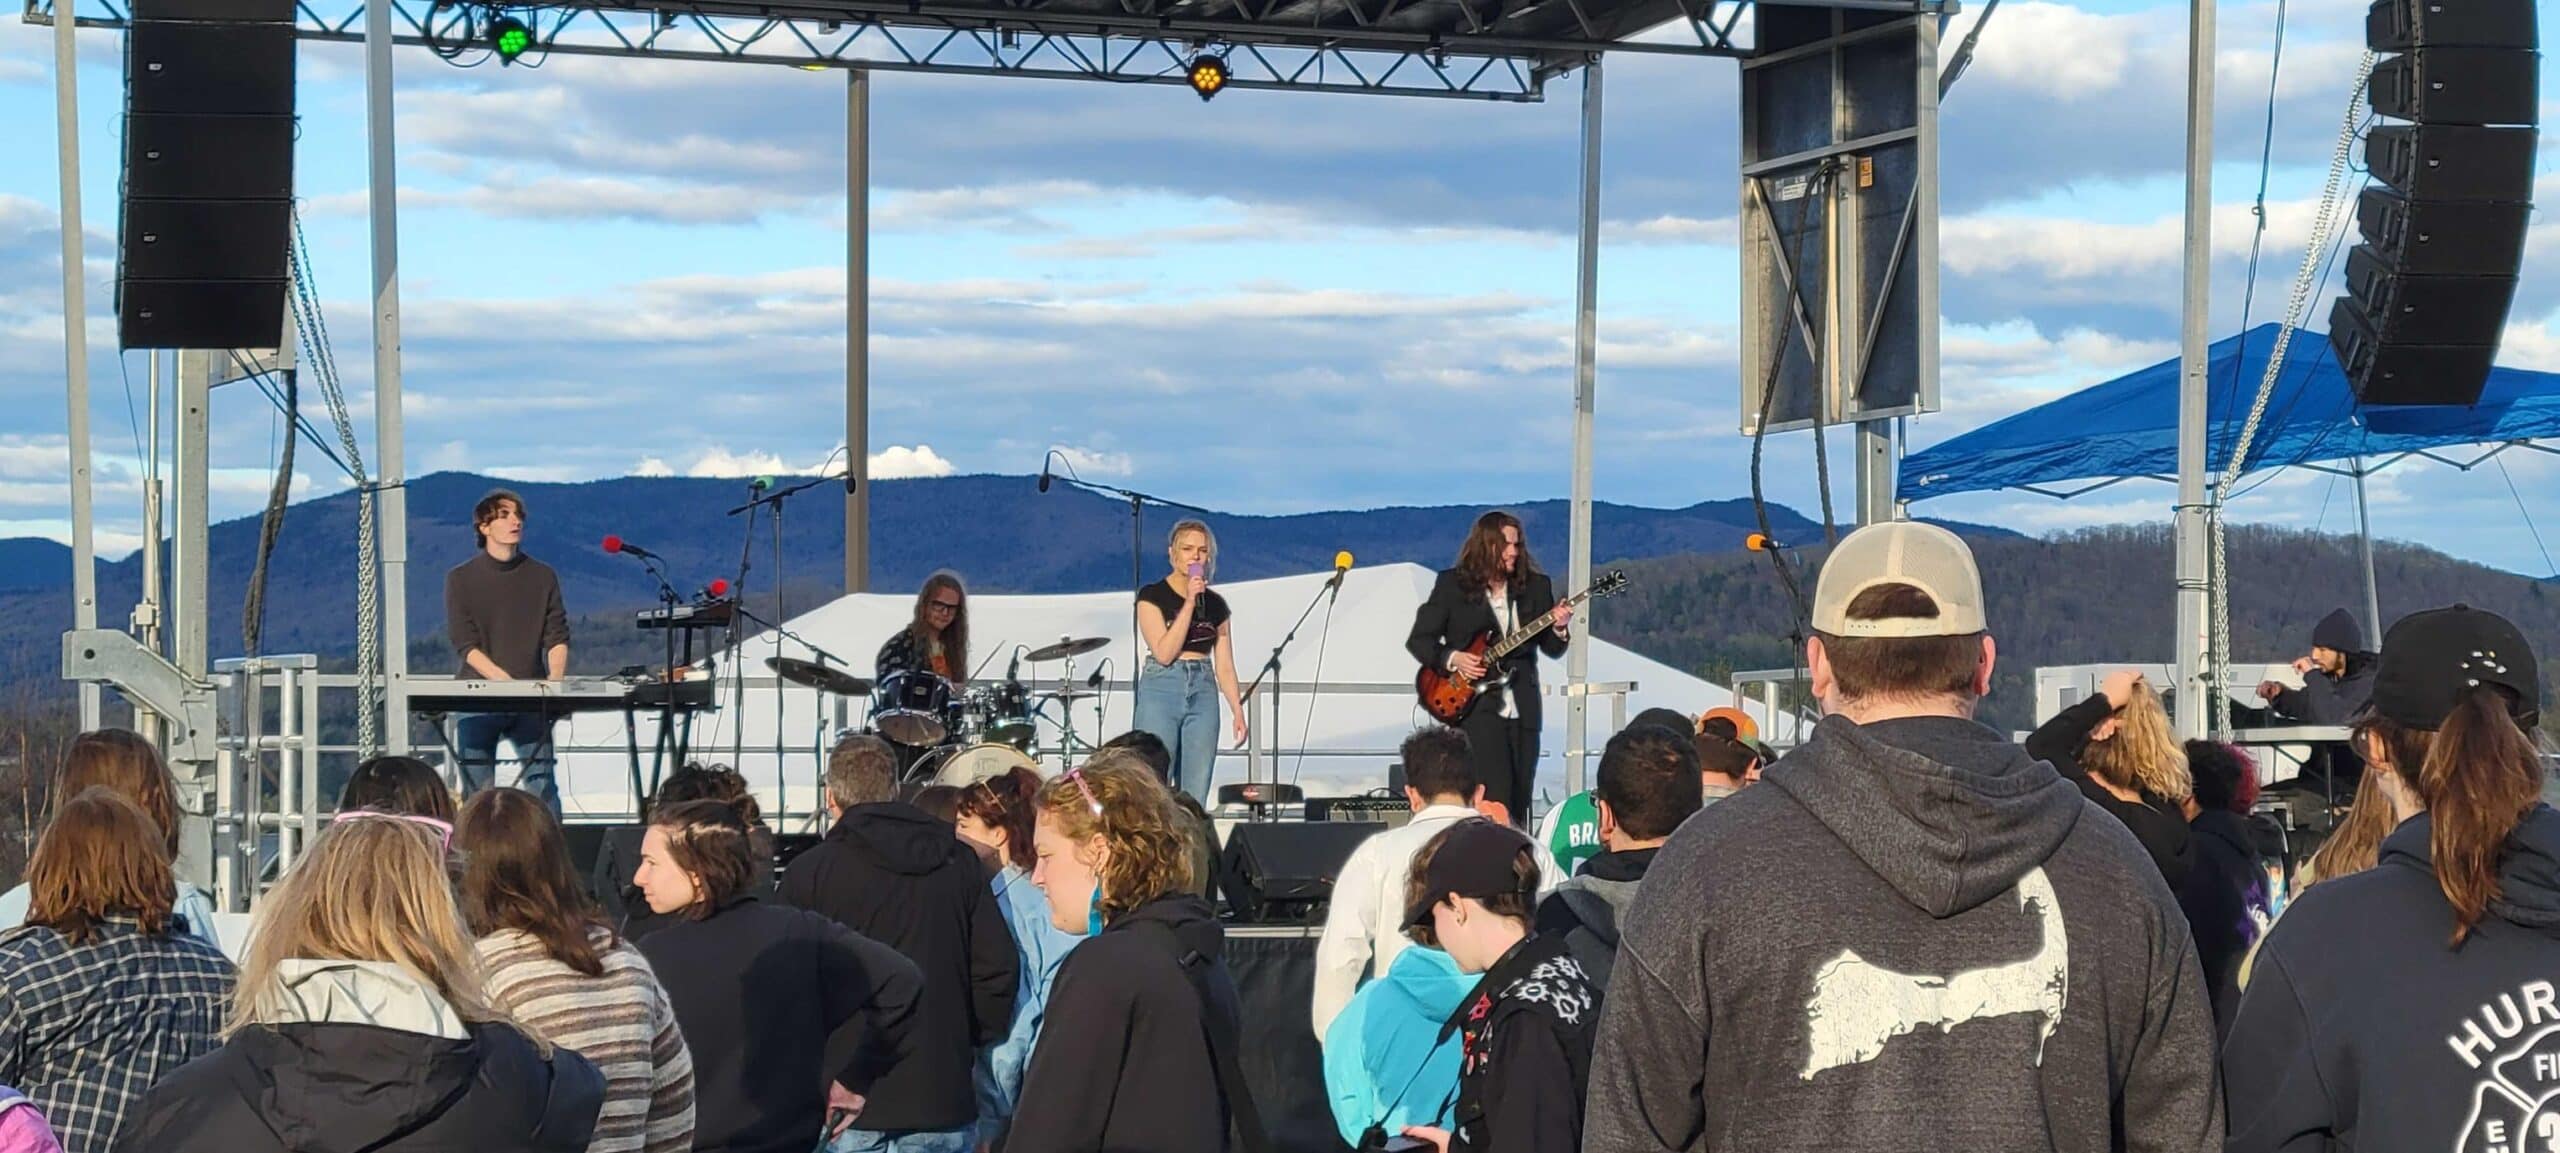 A band on a stage with mountains behind them as a crowd listens in front of them.